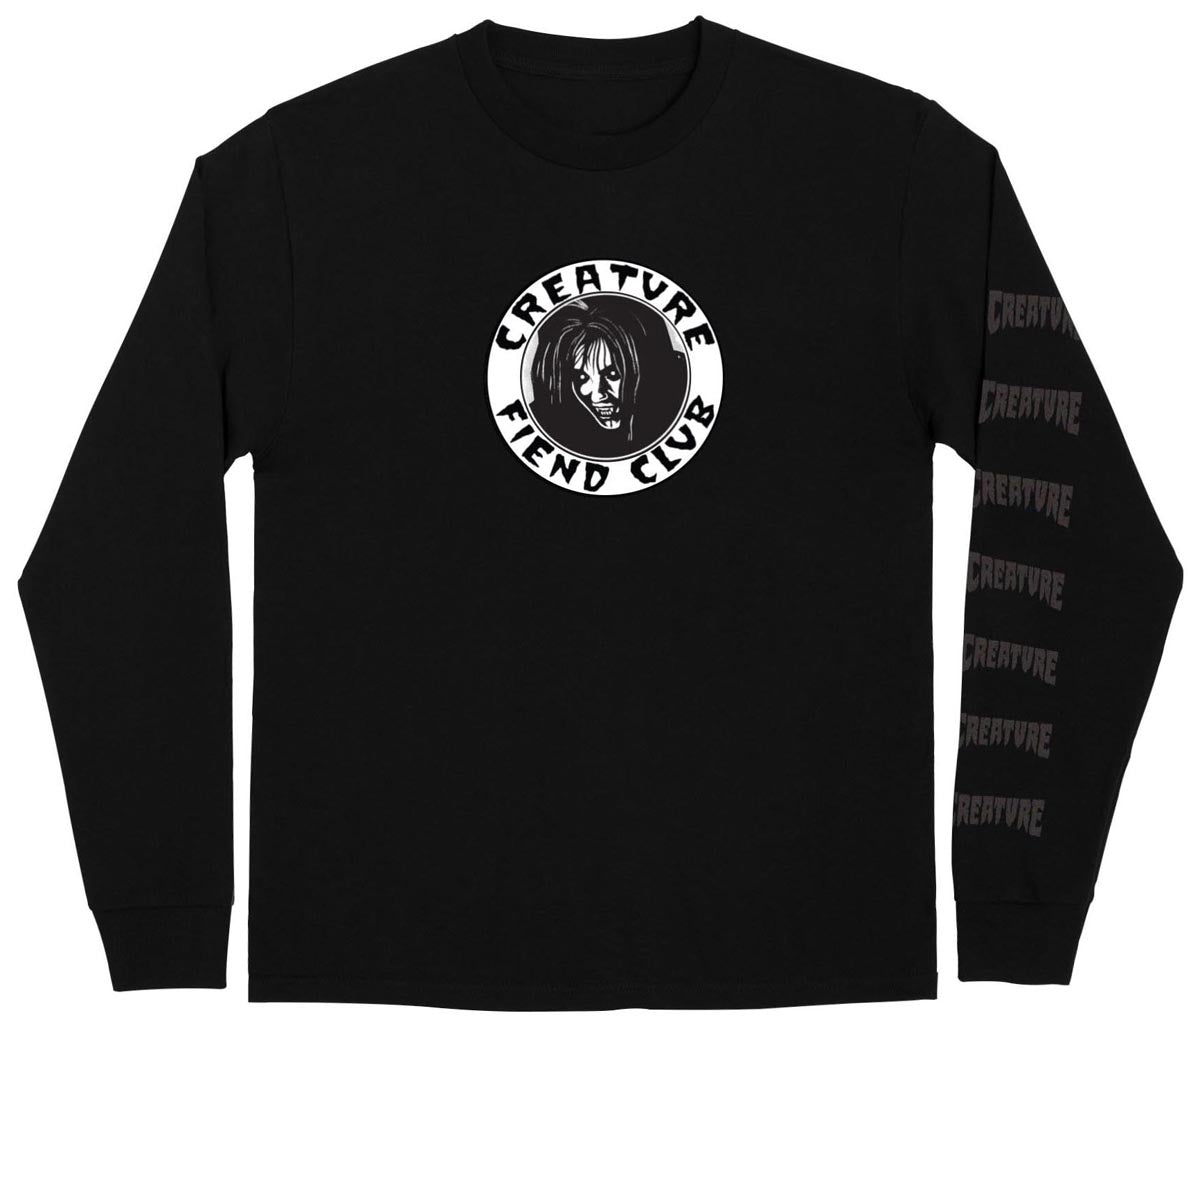 Creature Fiend Club Relic Front Long Sleeve T-Shirt - Black image 1